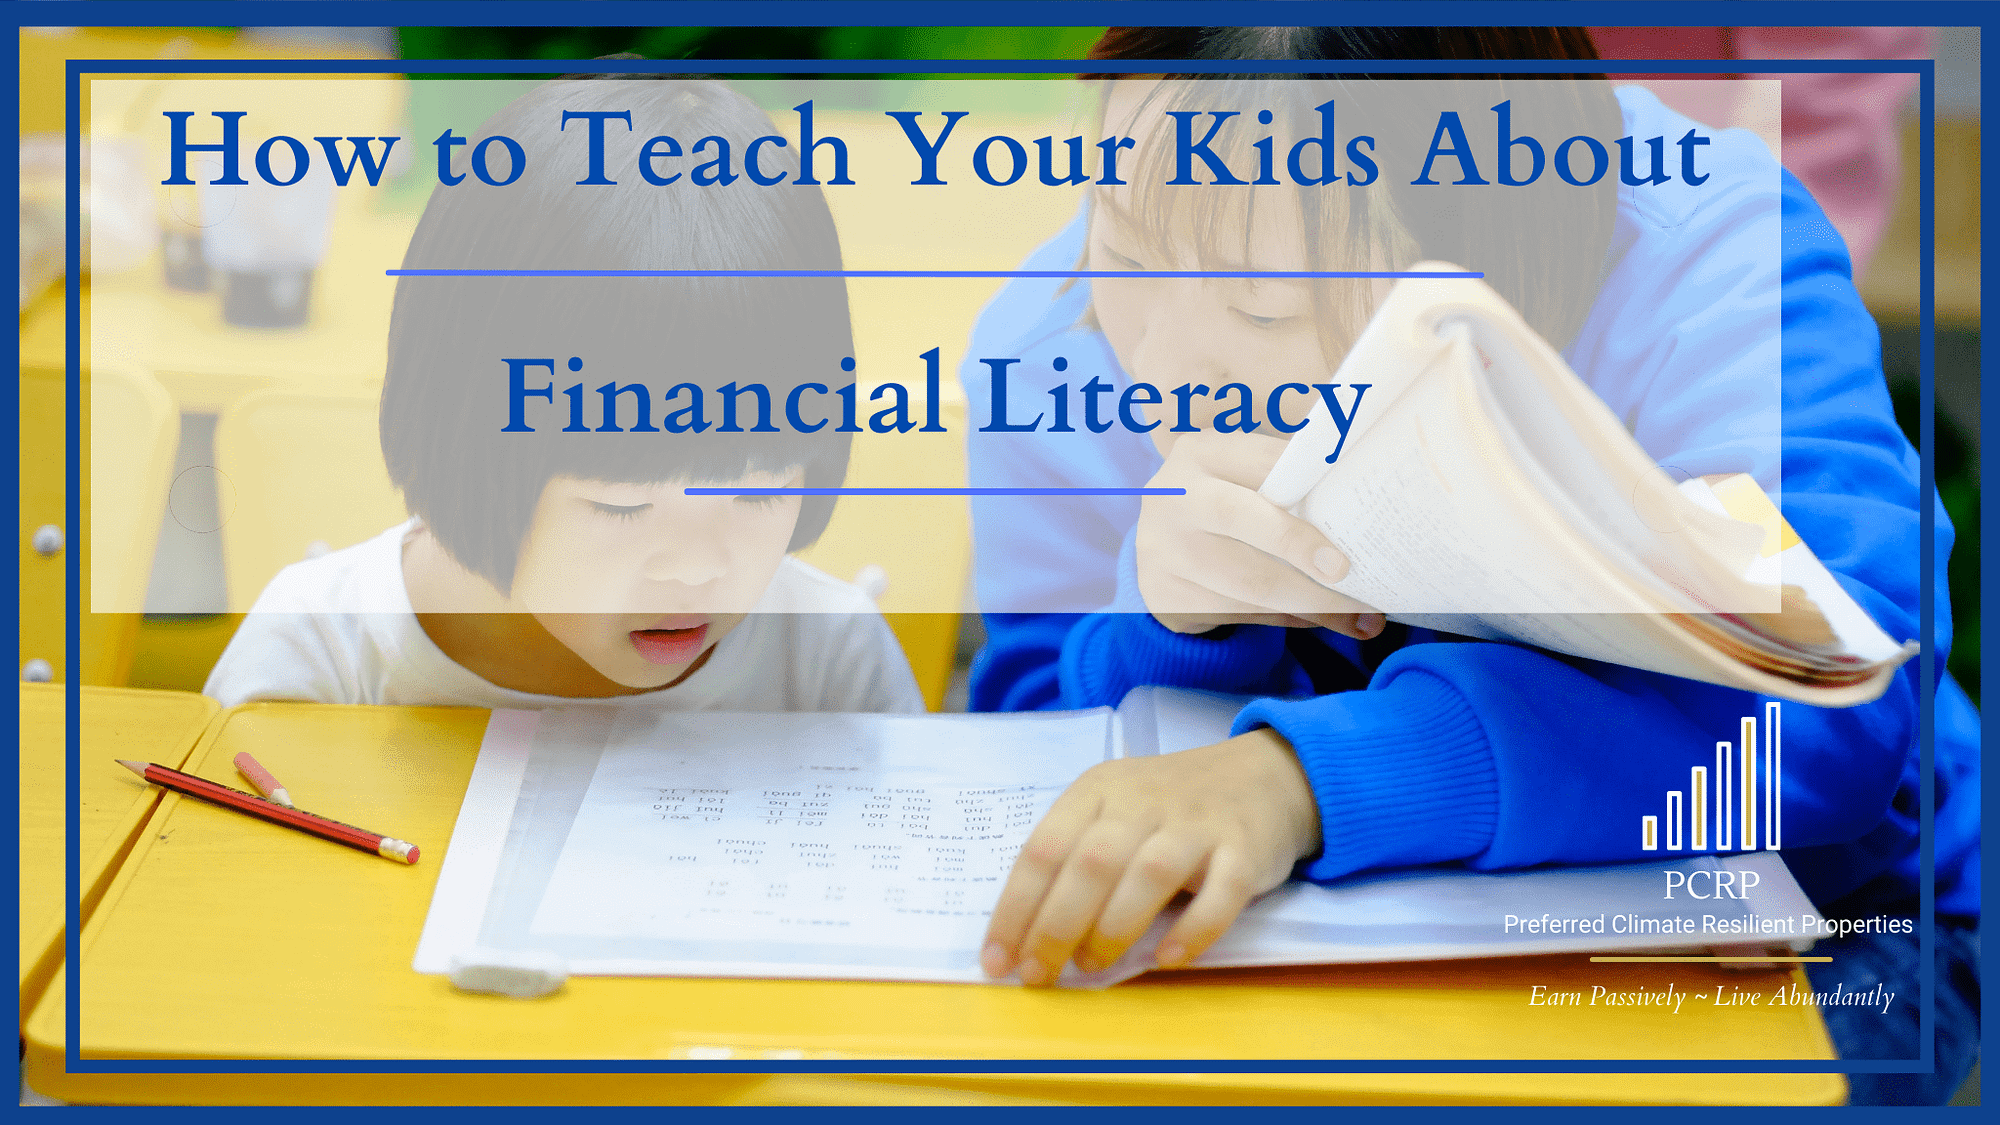 How to teach your kids financial literacy